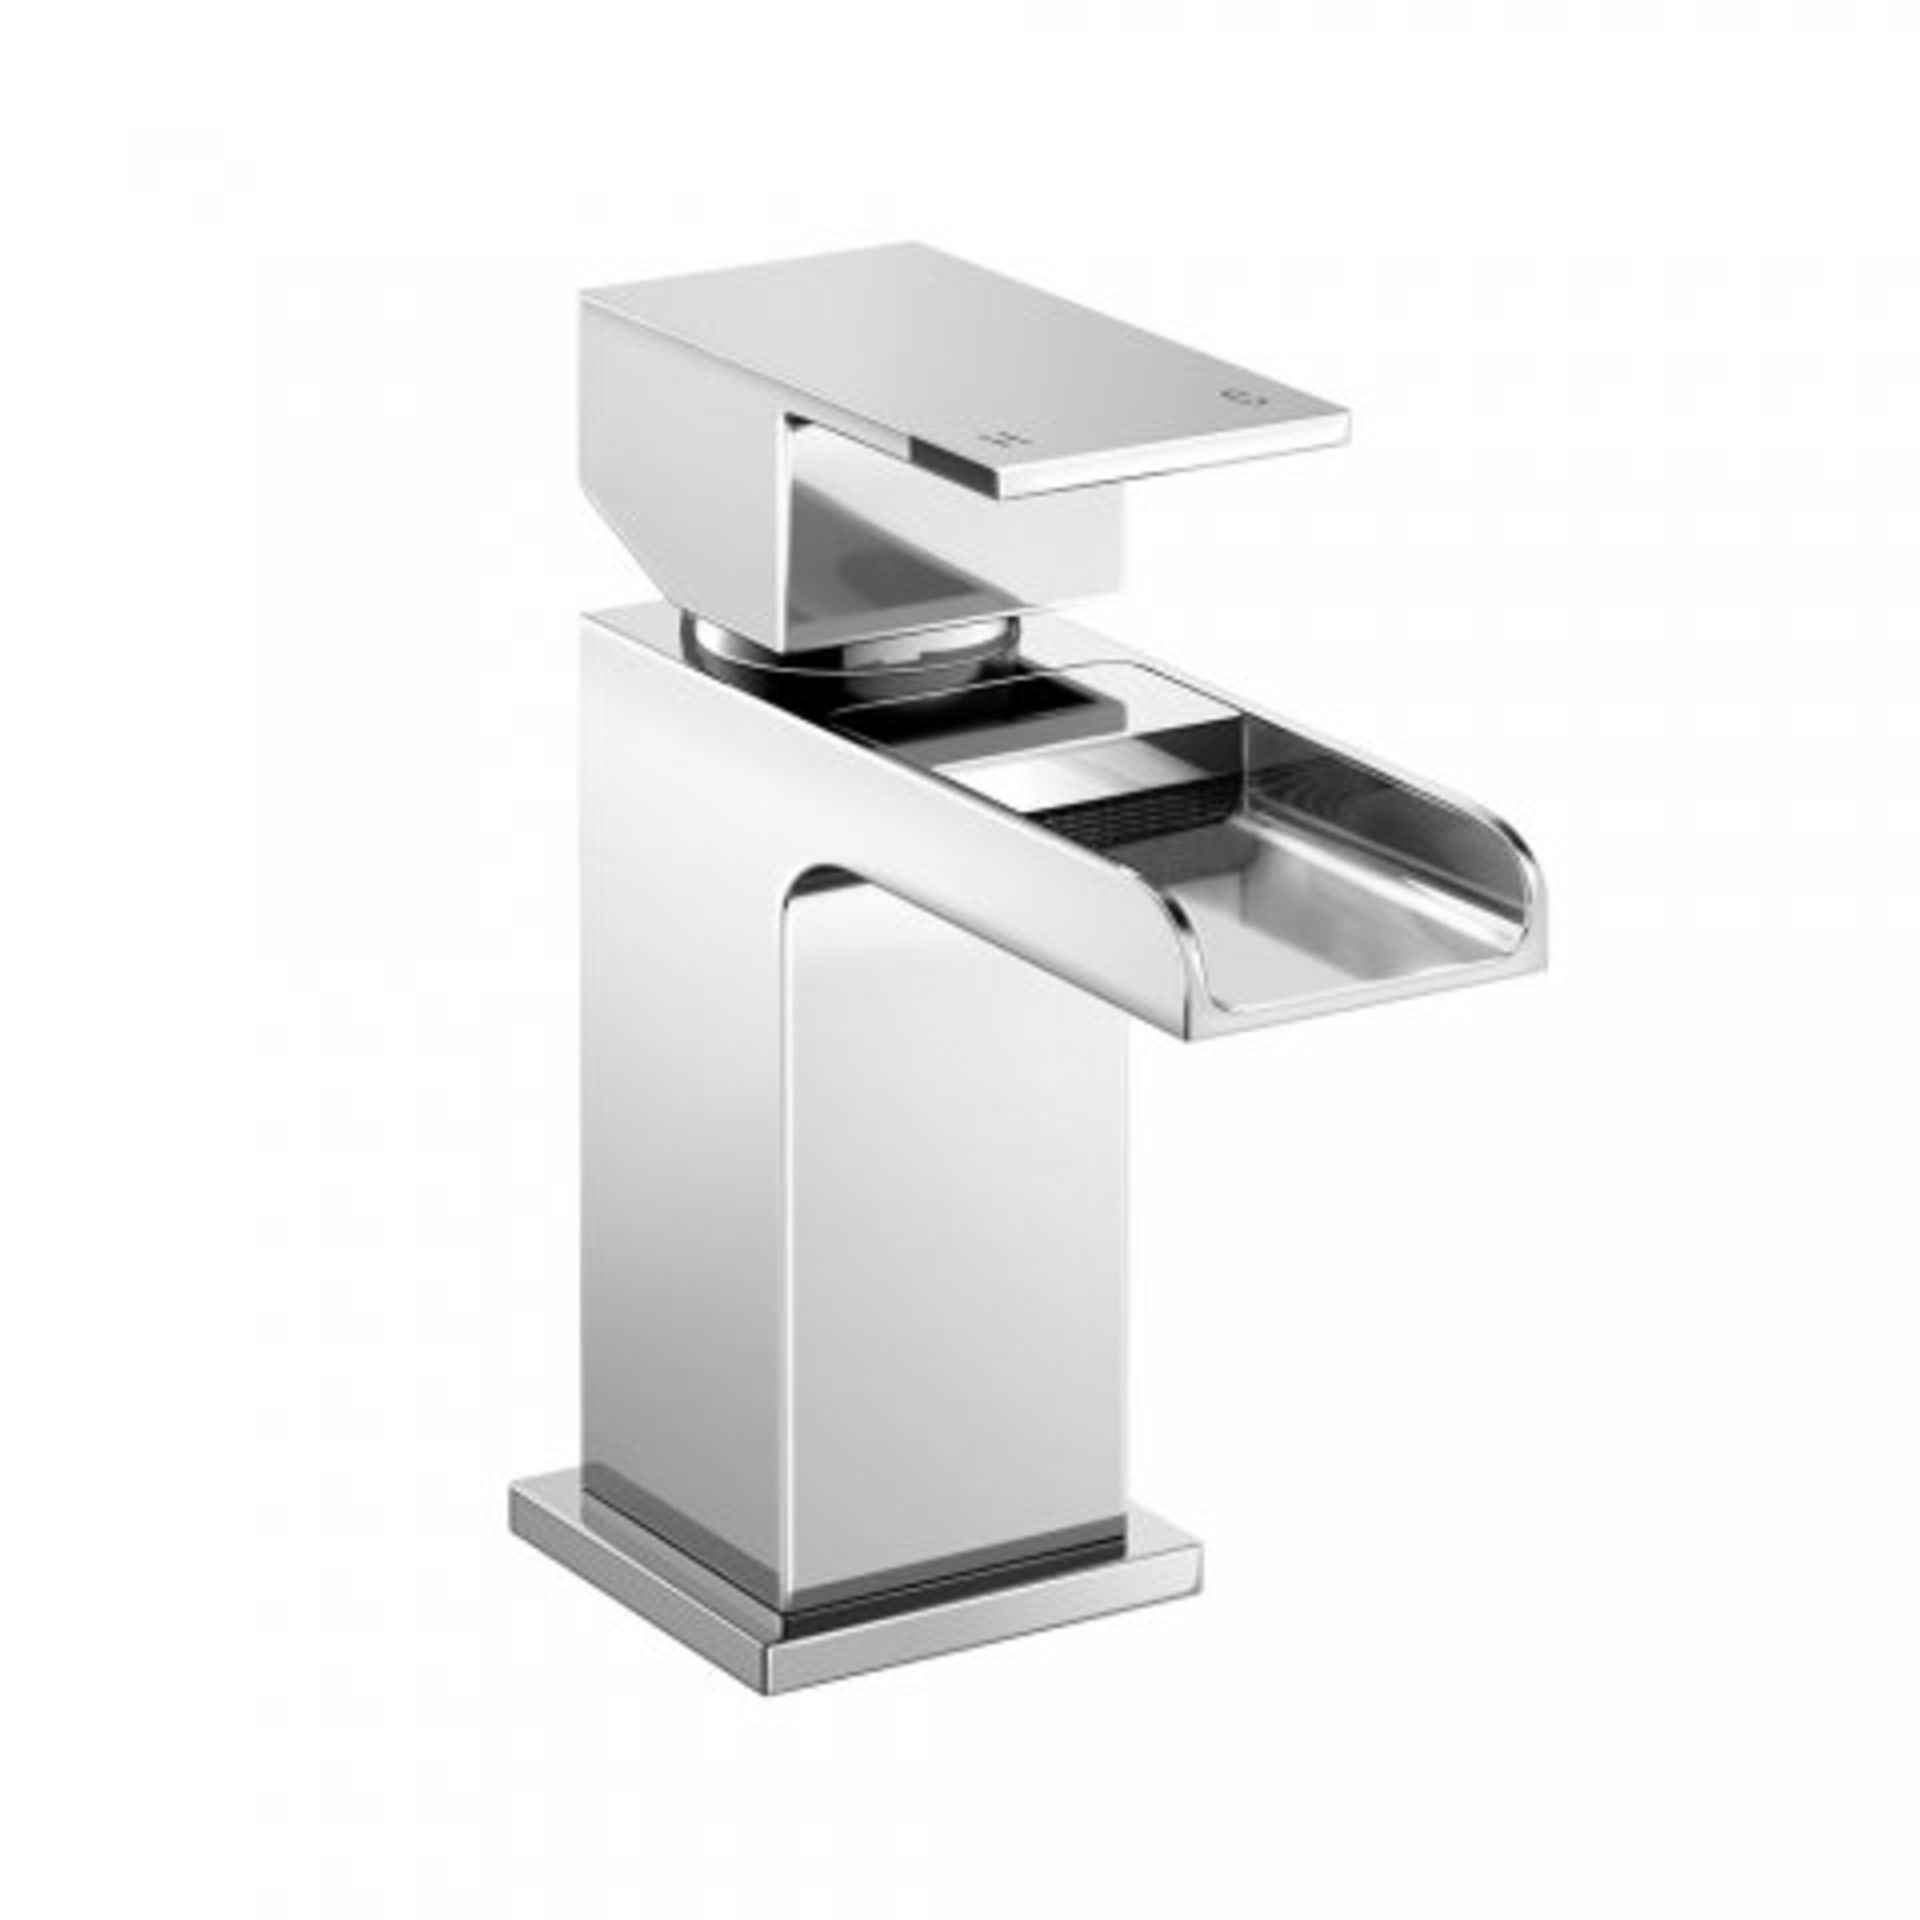 5 x New & Boxed Niagra Basin Mixer Tap. TB3107. Waterfall Feature Our Range Of Waterfall Taps A... - Image 2 of 3